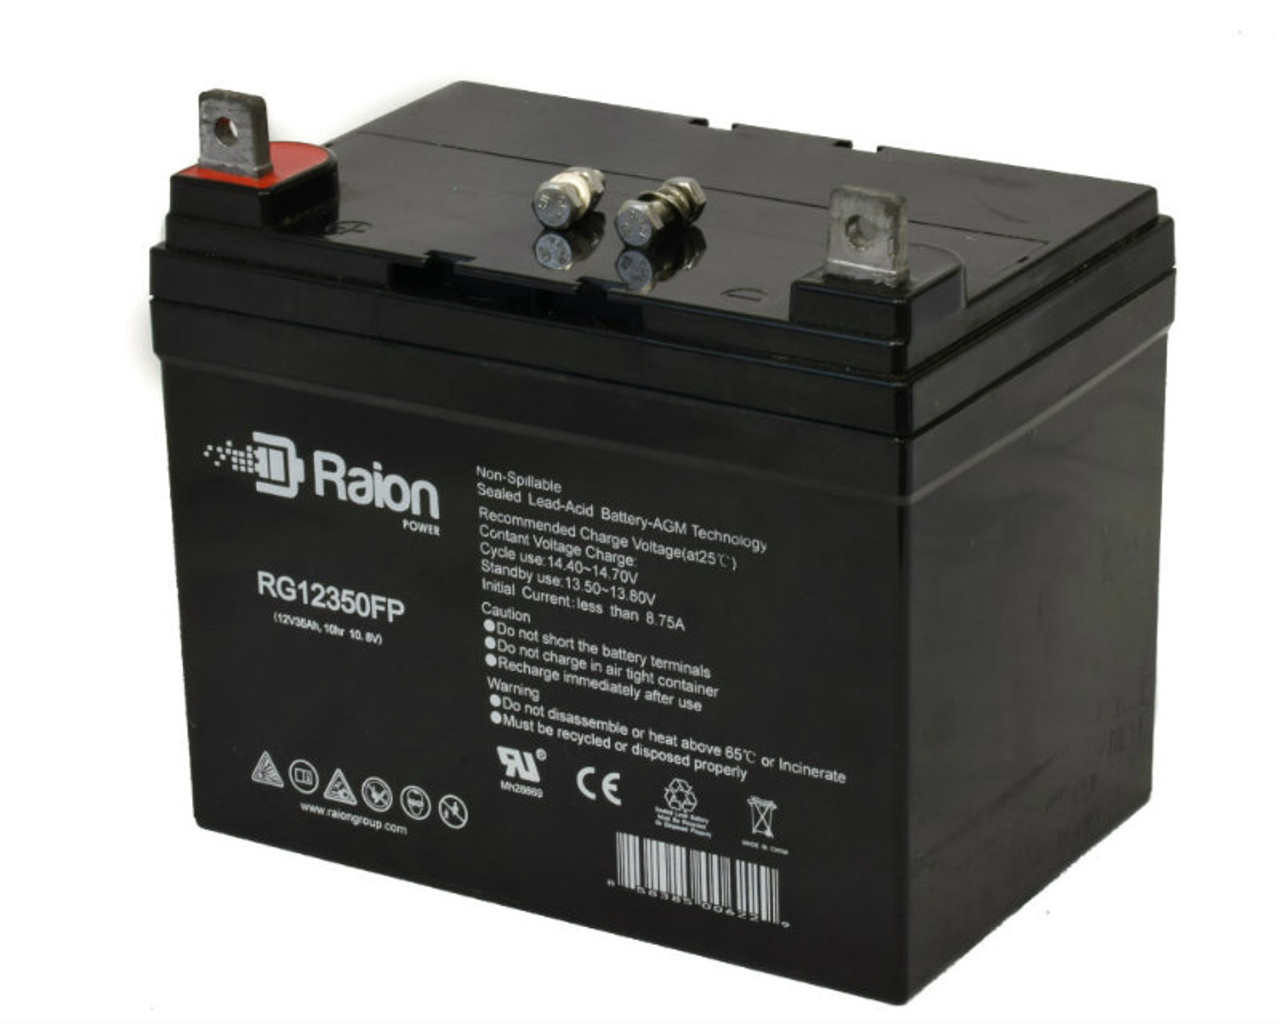 Raion Power Replacement 12V 35Ah RG12350FP Battery for Ingersoll Equipment 3018